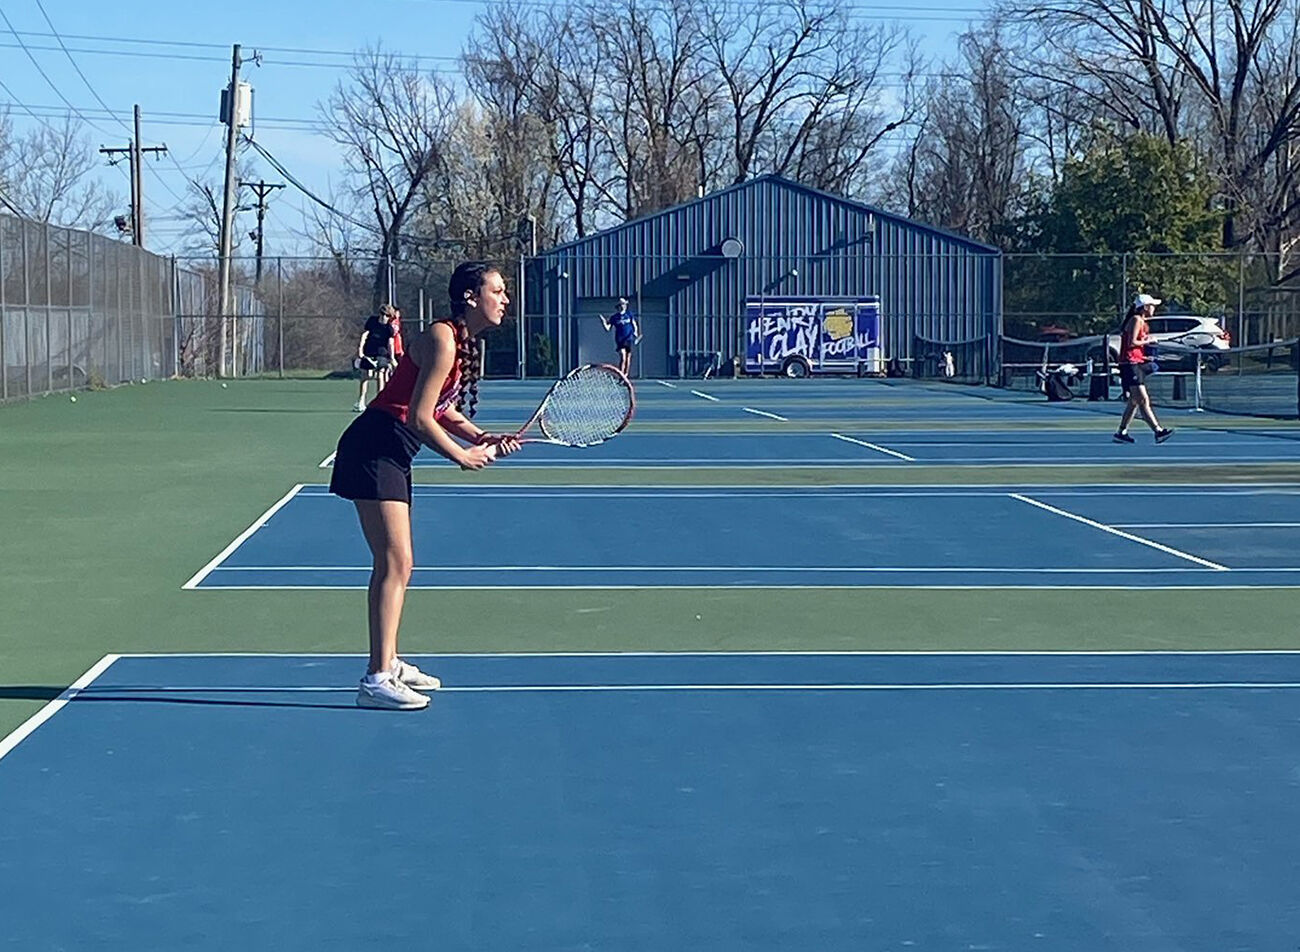 HIGH SCHOOL TENNIS: Henry Clay sweeps Madison Central in Lexington